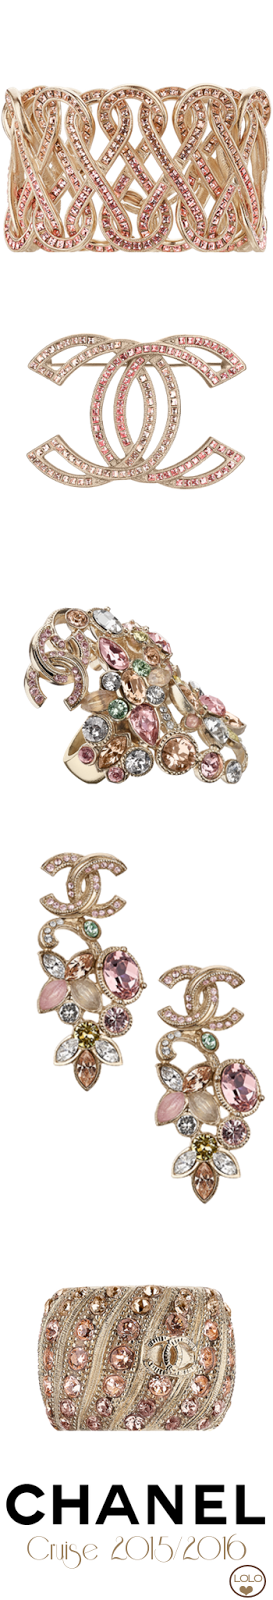 Chanel Cruise 2015/16 Jewelry Collection